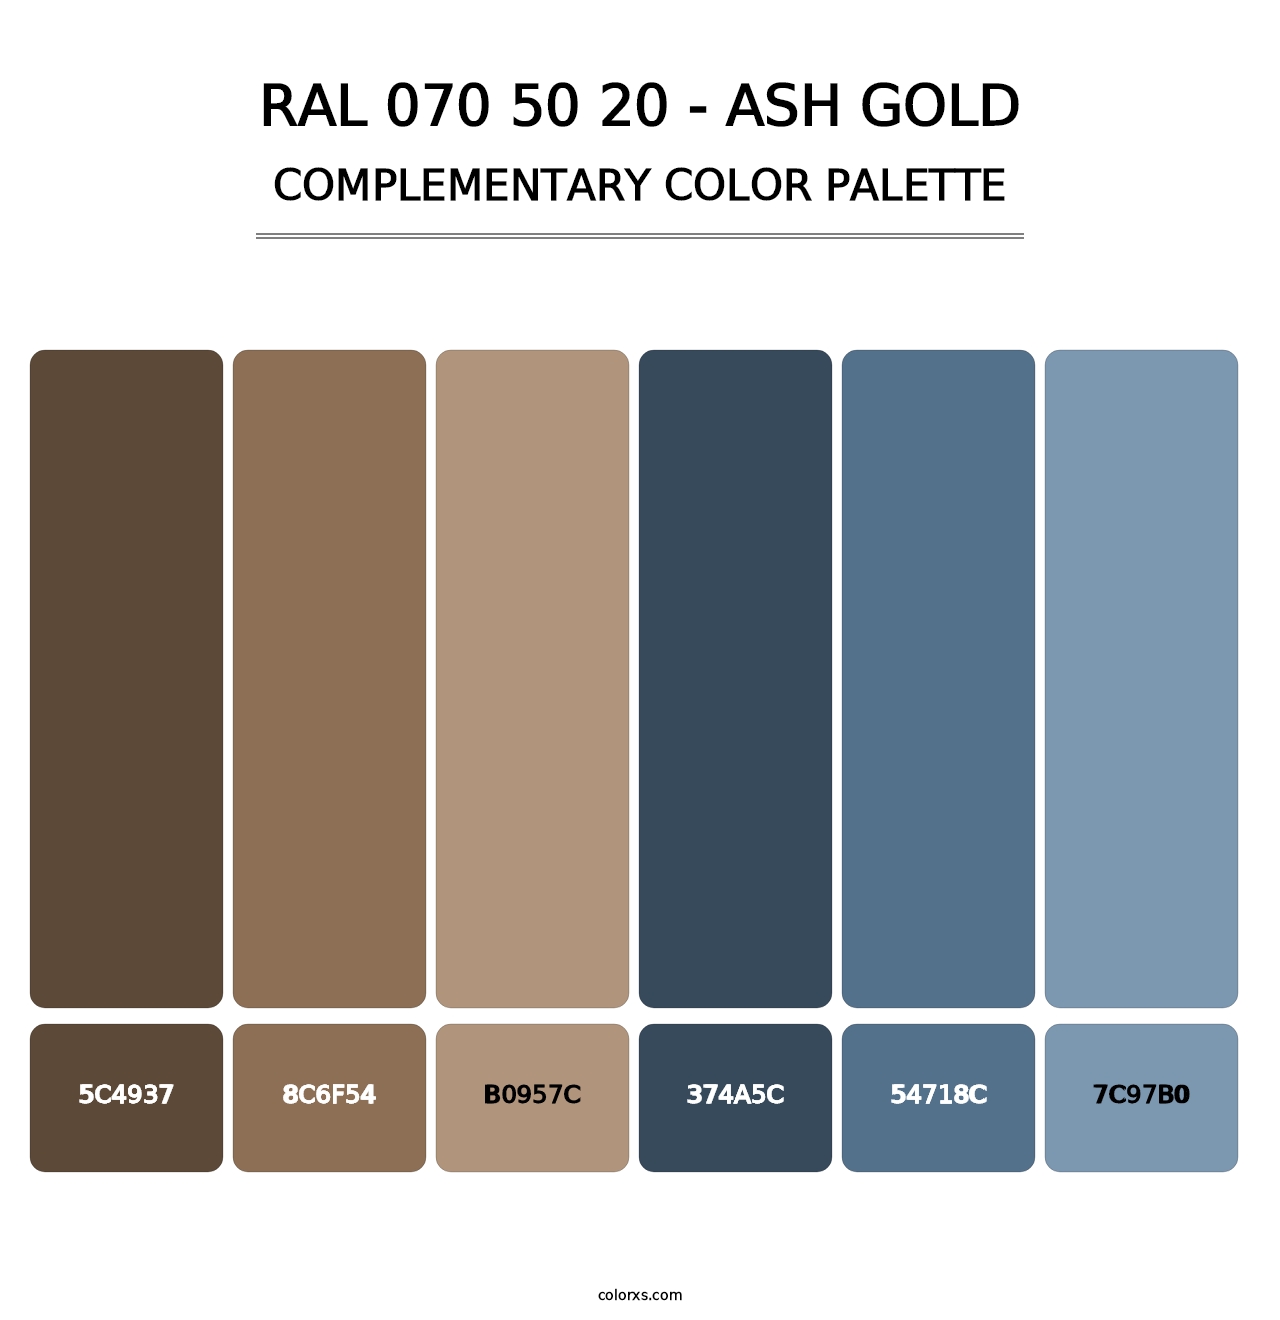 RAL 070 50 20 - Ash Gold - Complementary Color Palette